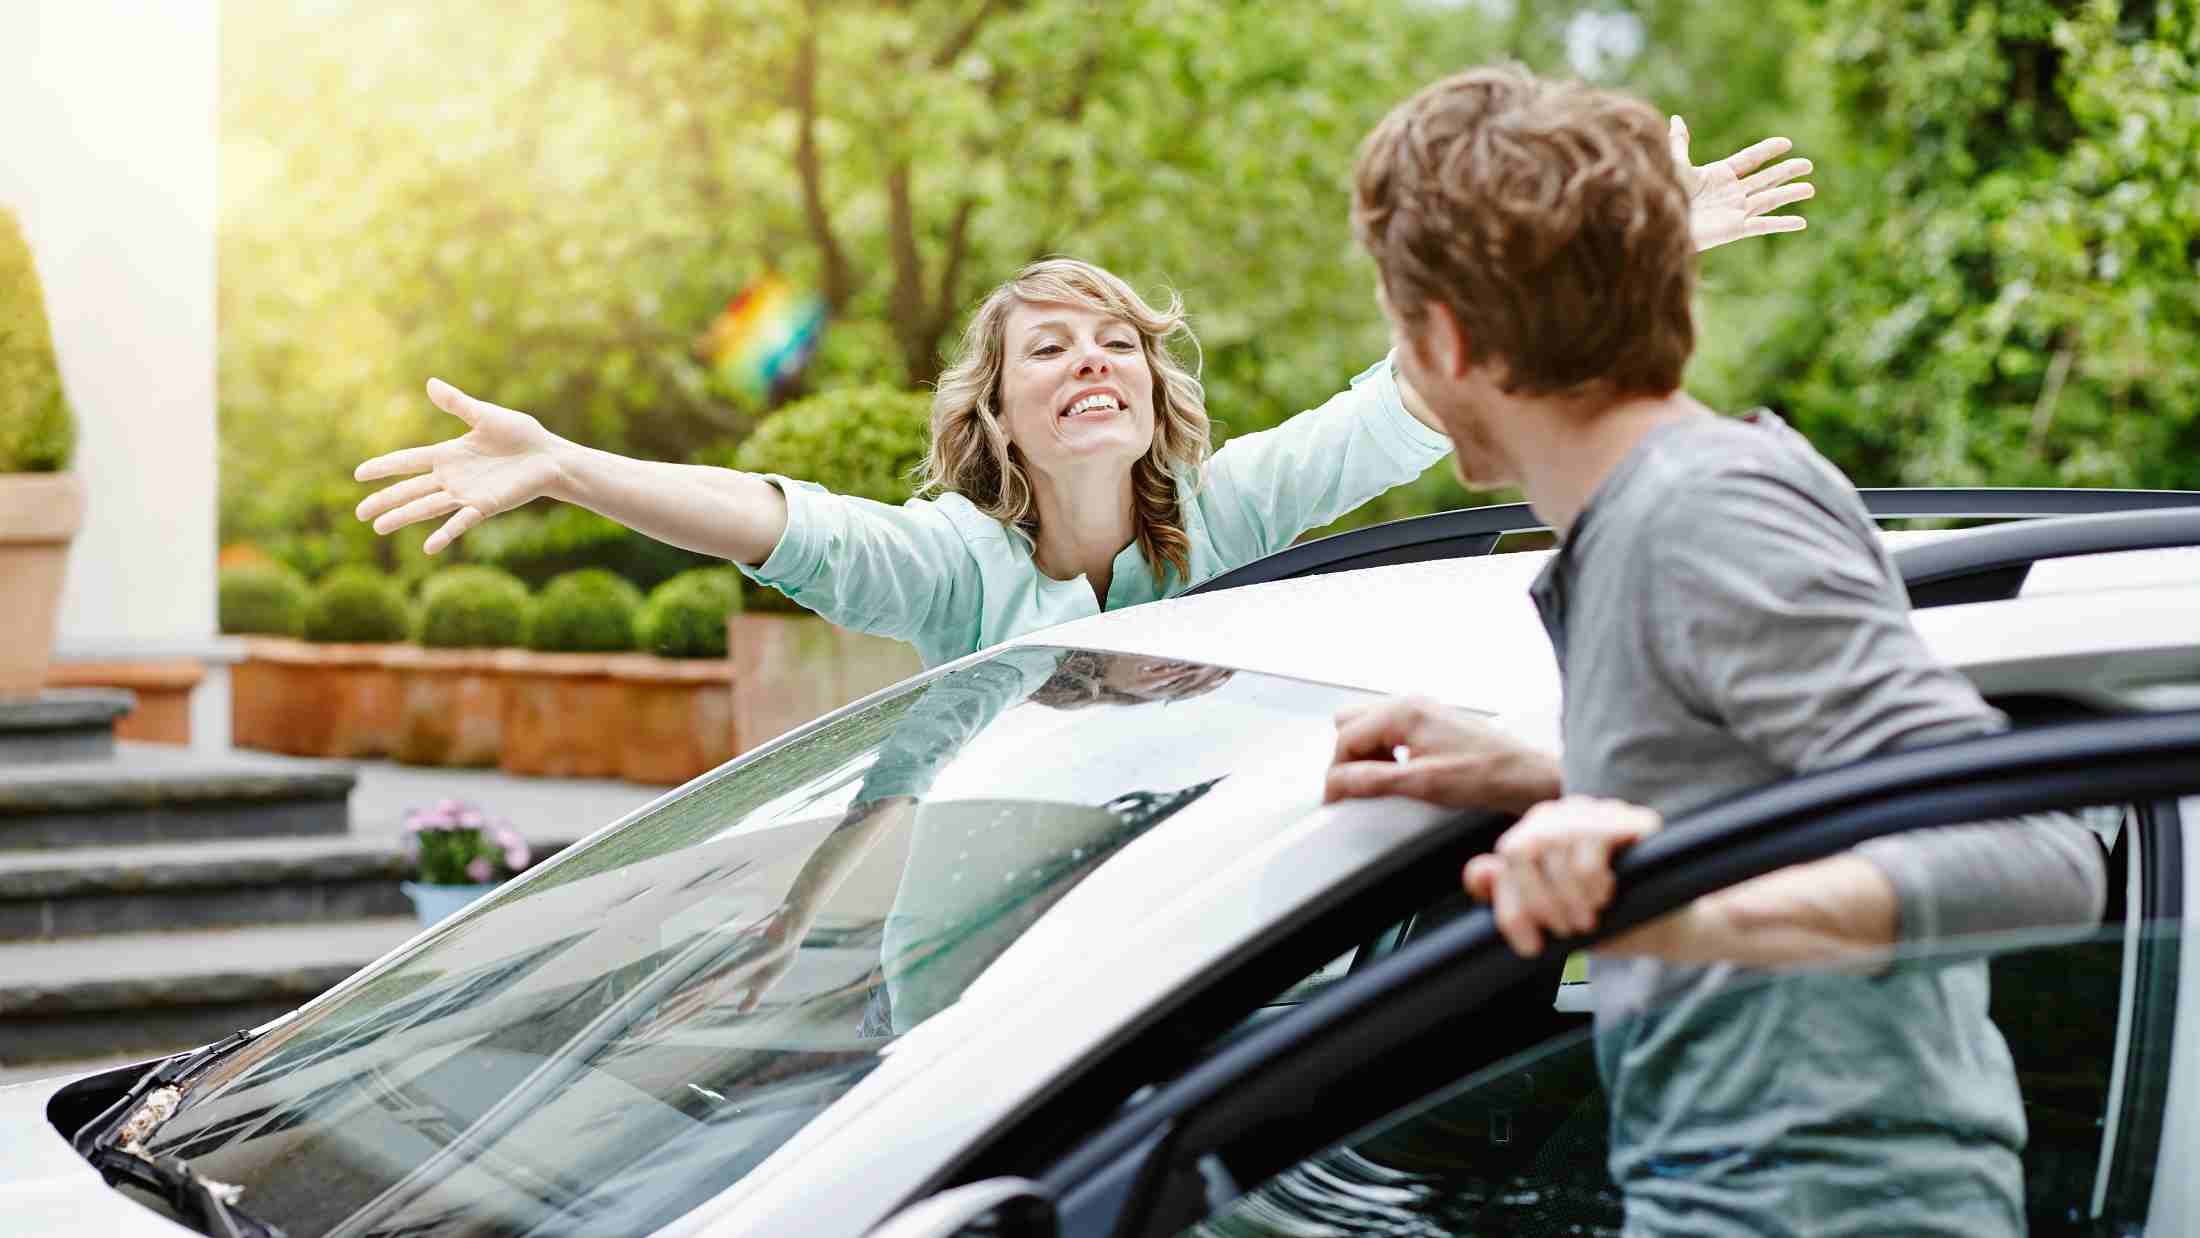 Happy woman with outstretched arms looking at a man who is entering a car